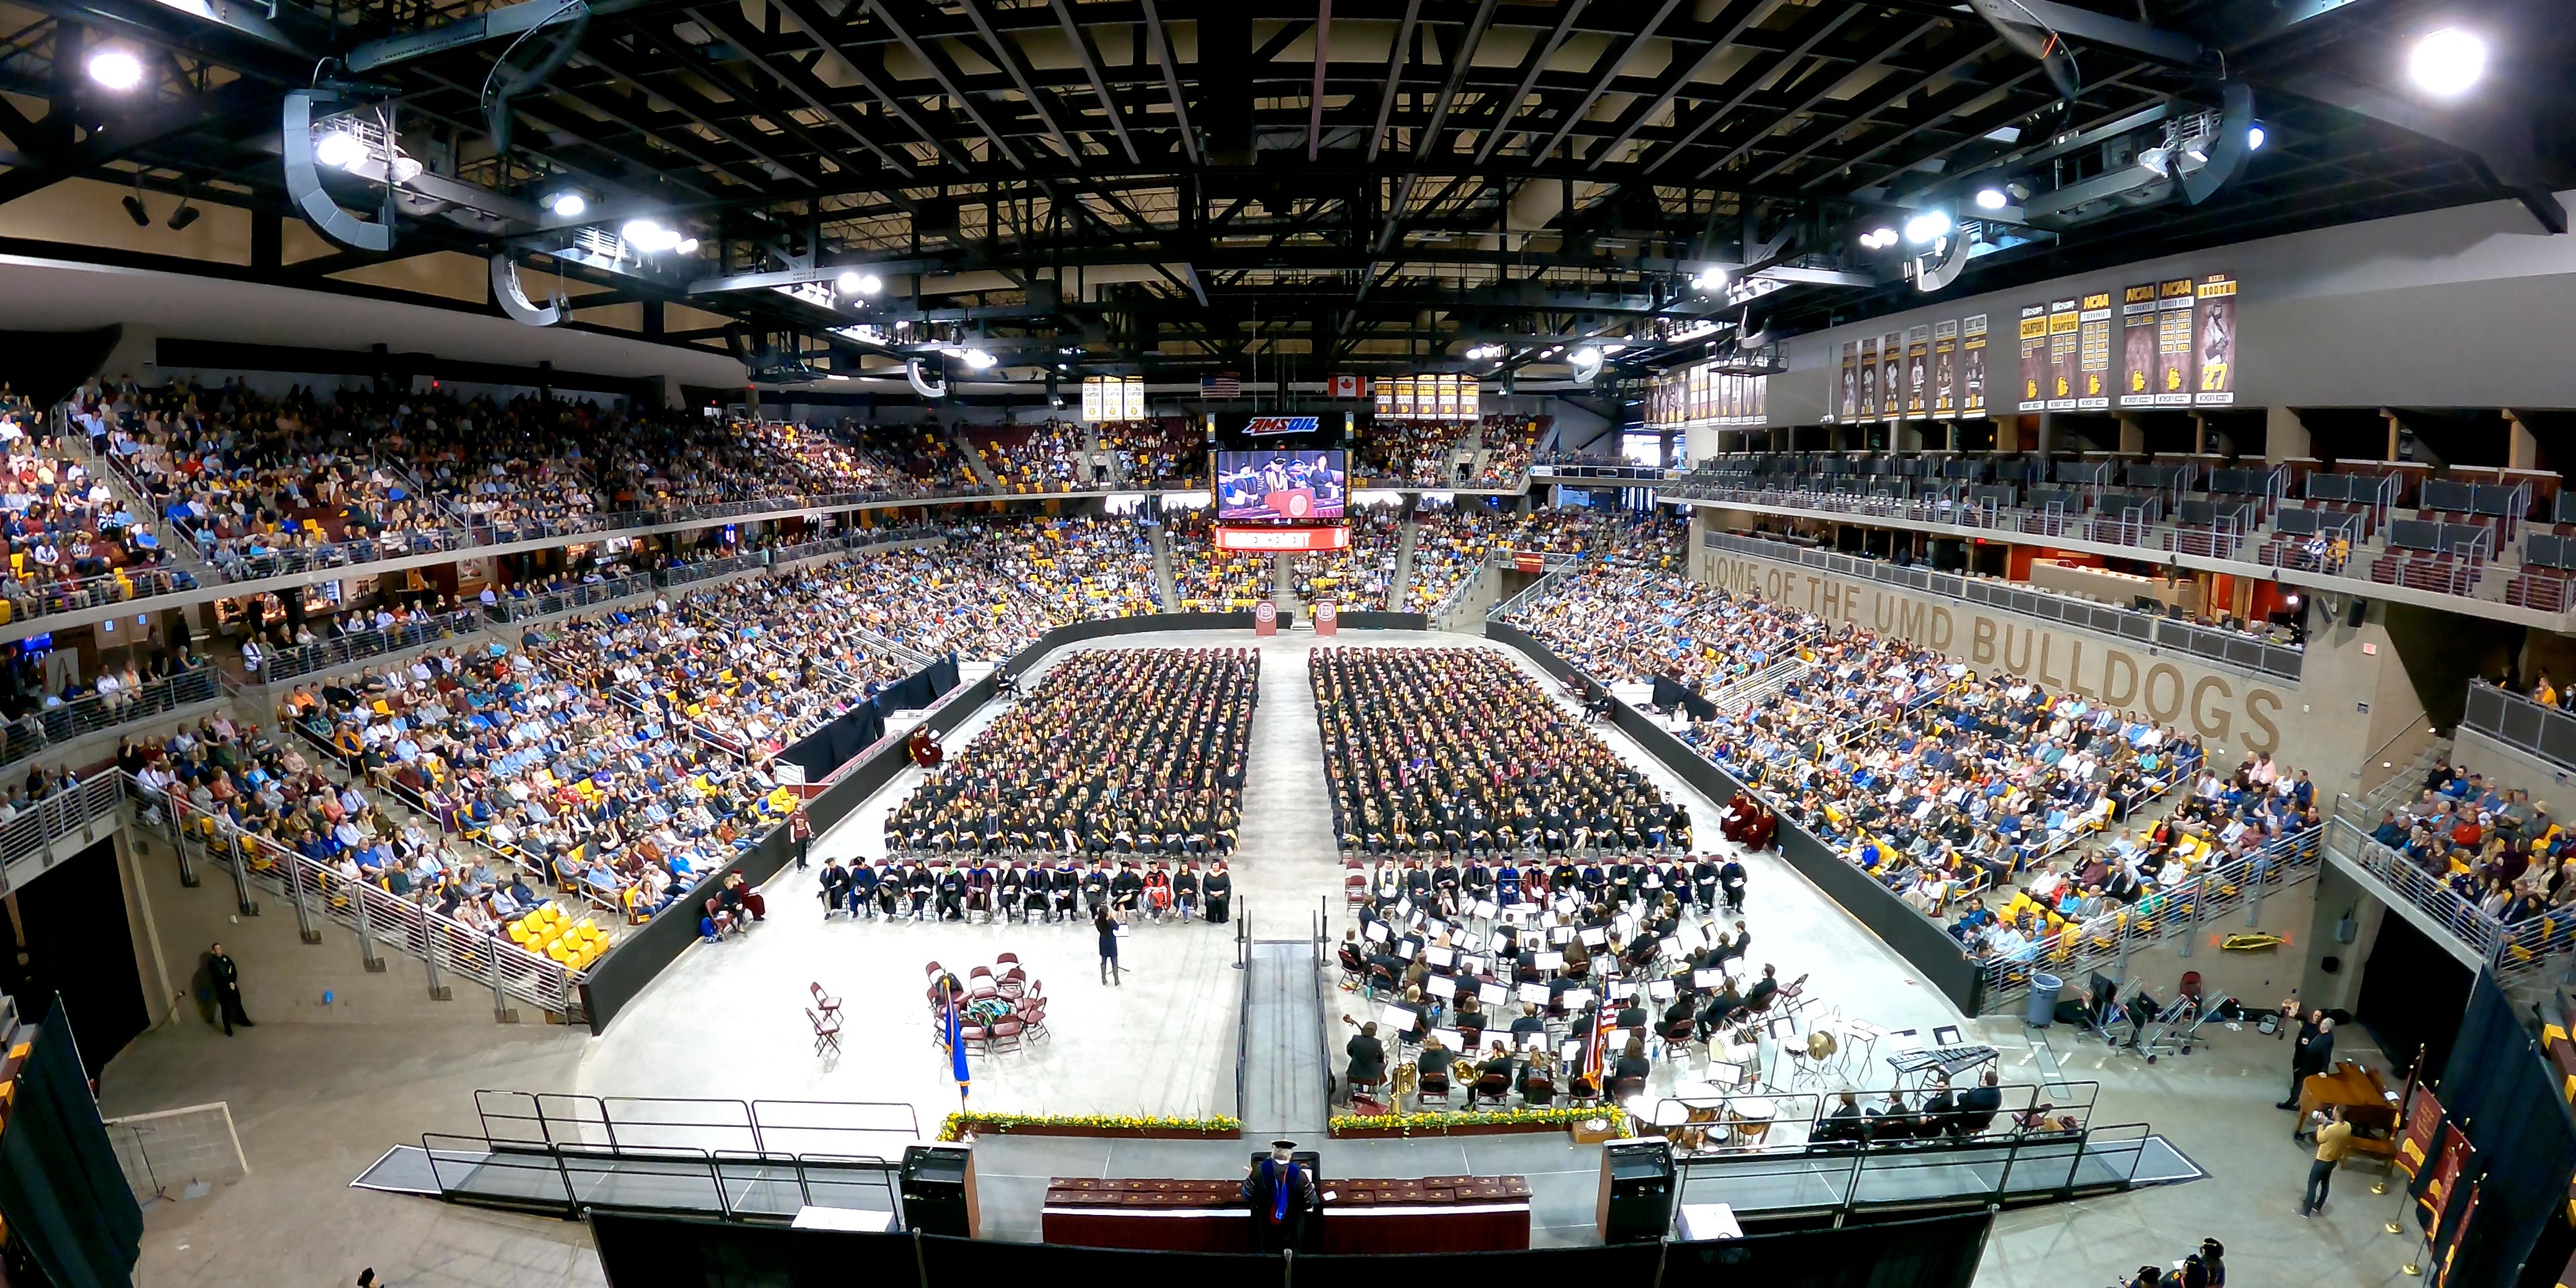 AMSOIL Arena filled with graduates and families during commencement